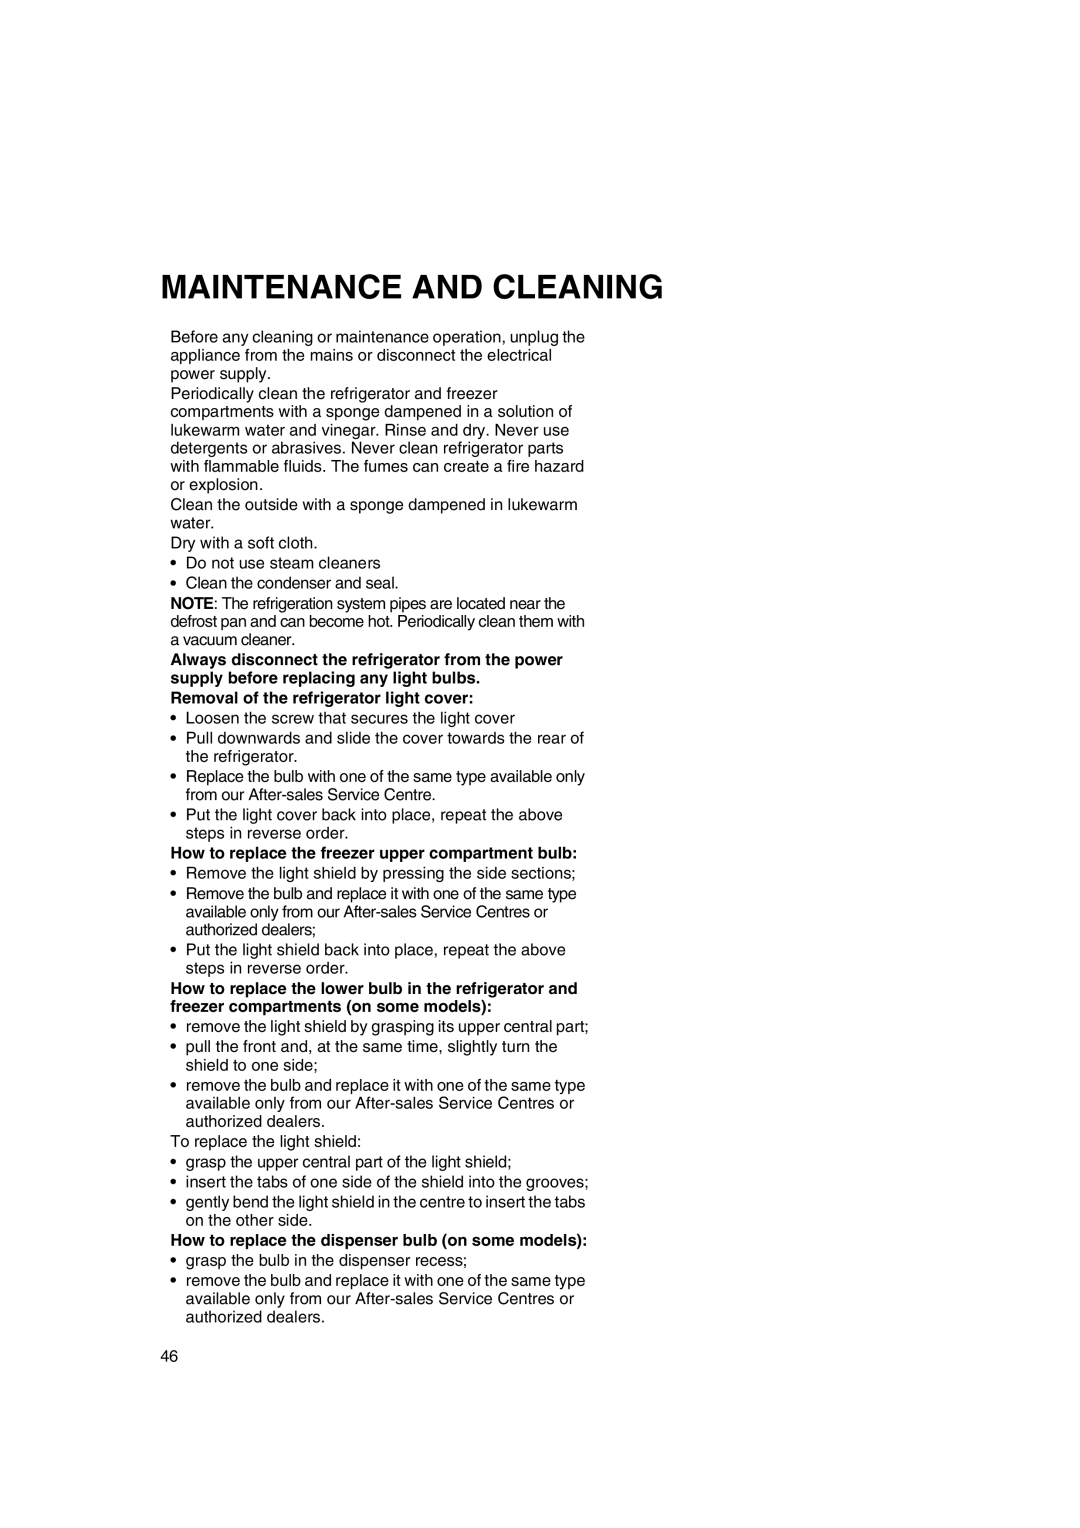 Smeg FA550XBI manual Maintenance And Cleaning, Removal of the refrigerator light cover 